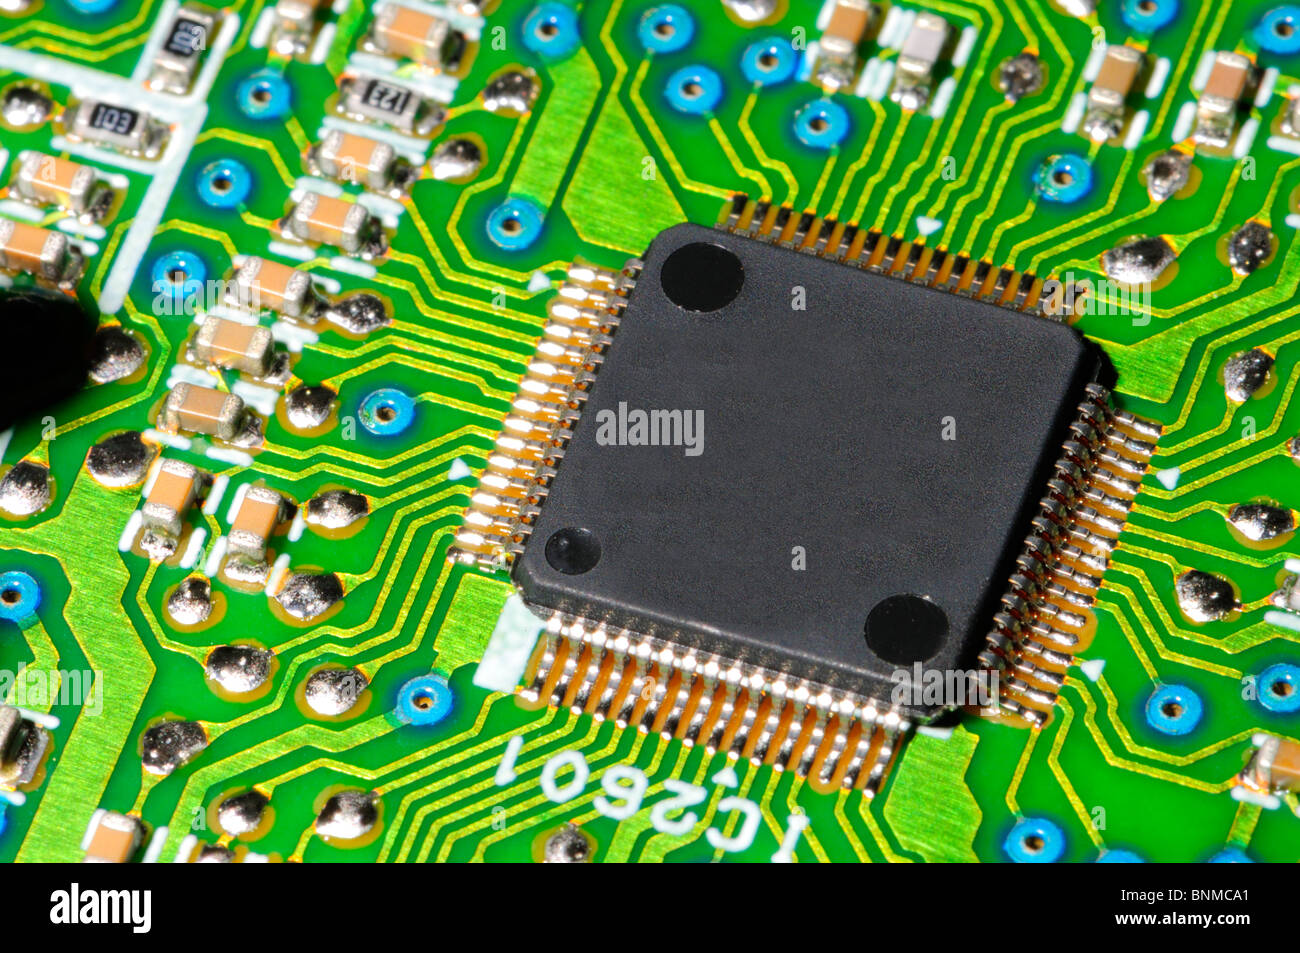 Printed Circuit Board with microprocessor from DVD player Stock Photo